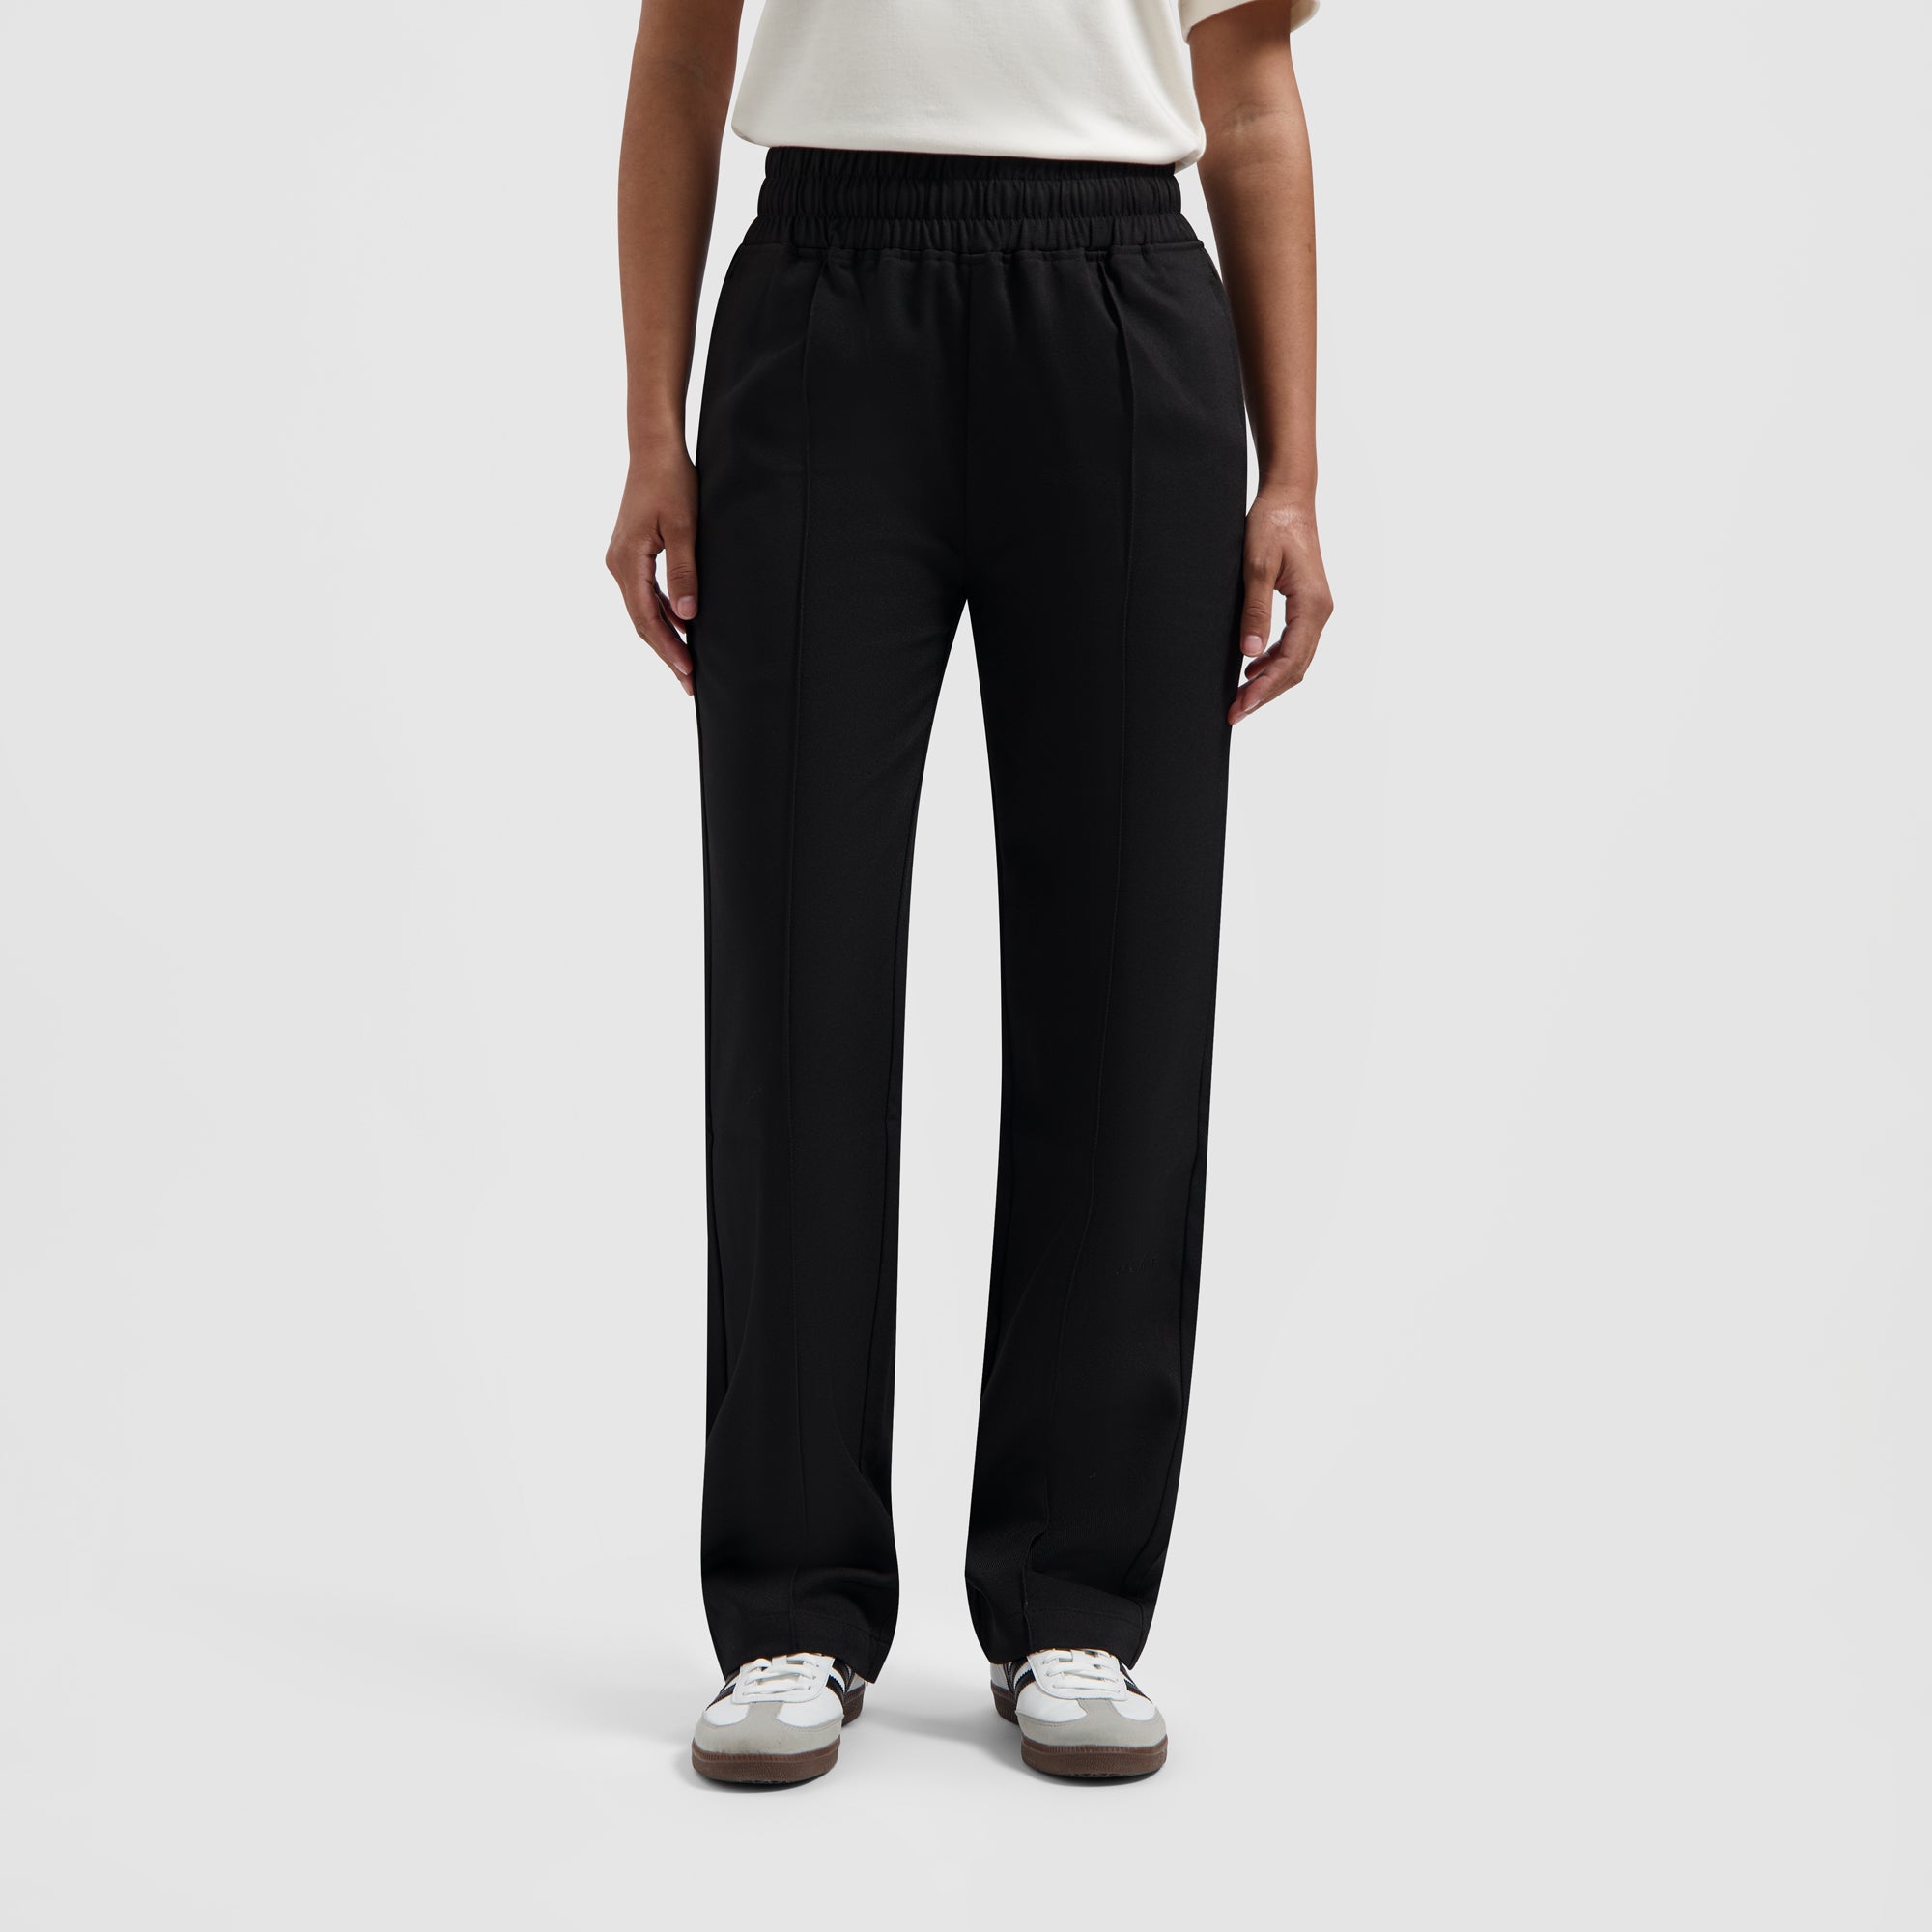 Elastic Waist Band Pant W/Side Vent in Black exclusive at The Shoe – The  Shoe Hive